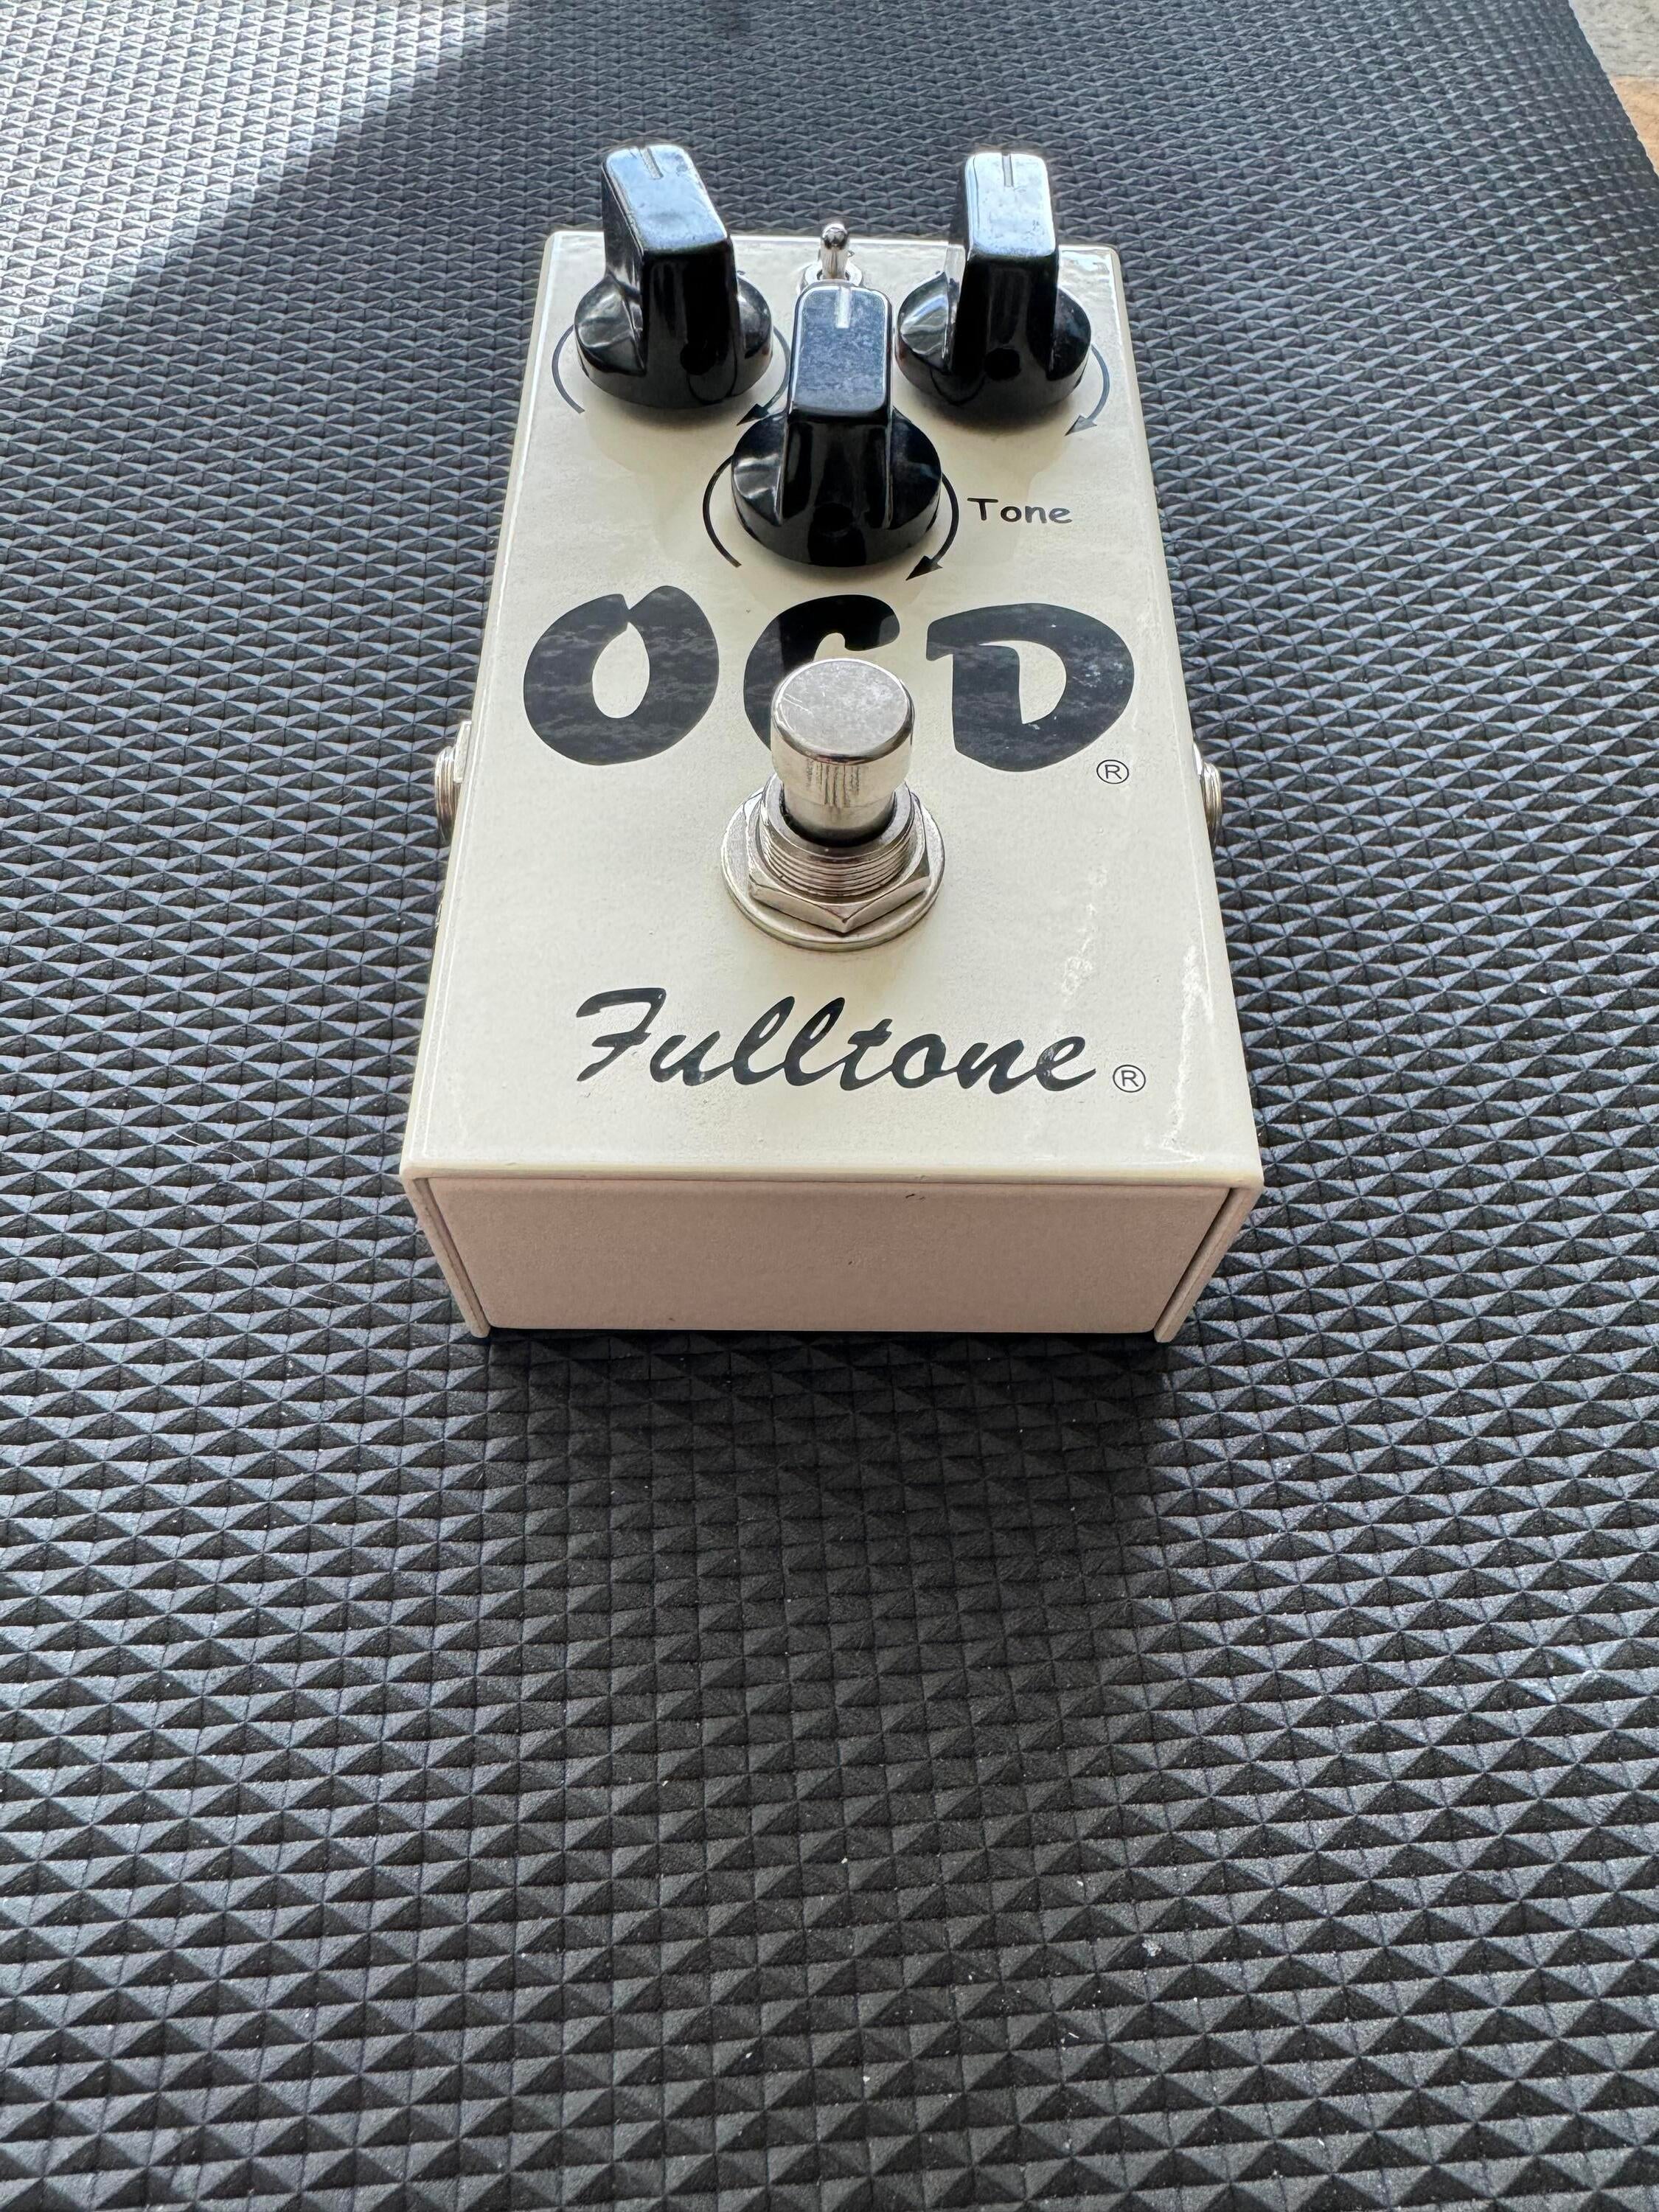 Used Fulltone OCD v1.7 Overdrive Pedal - Sweetwater's Gear Exchange